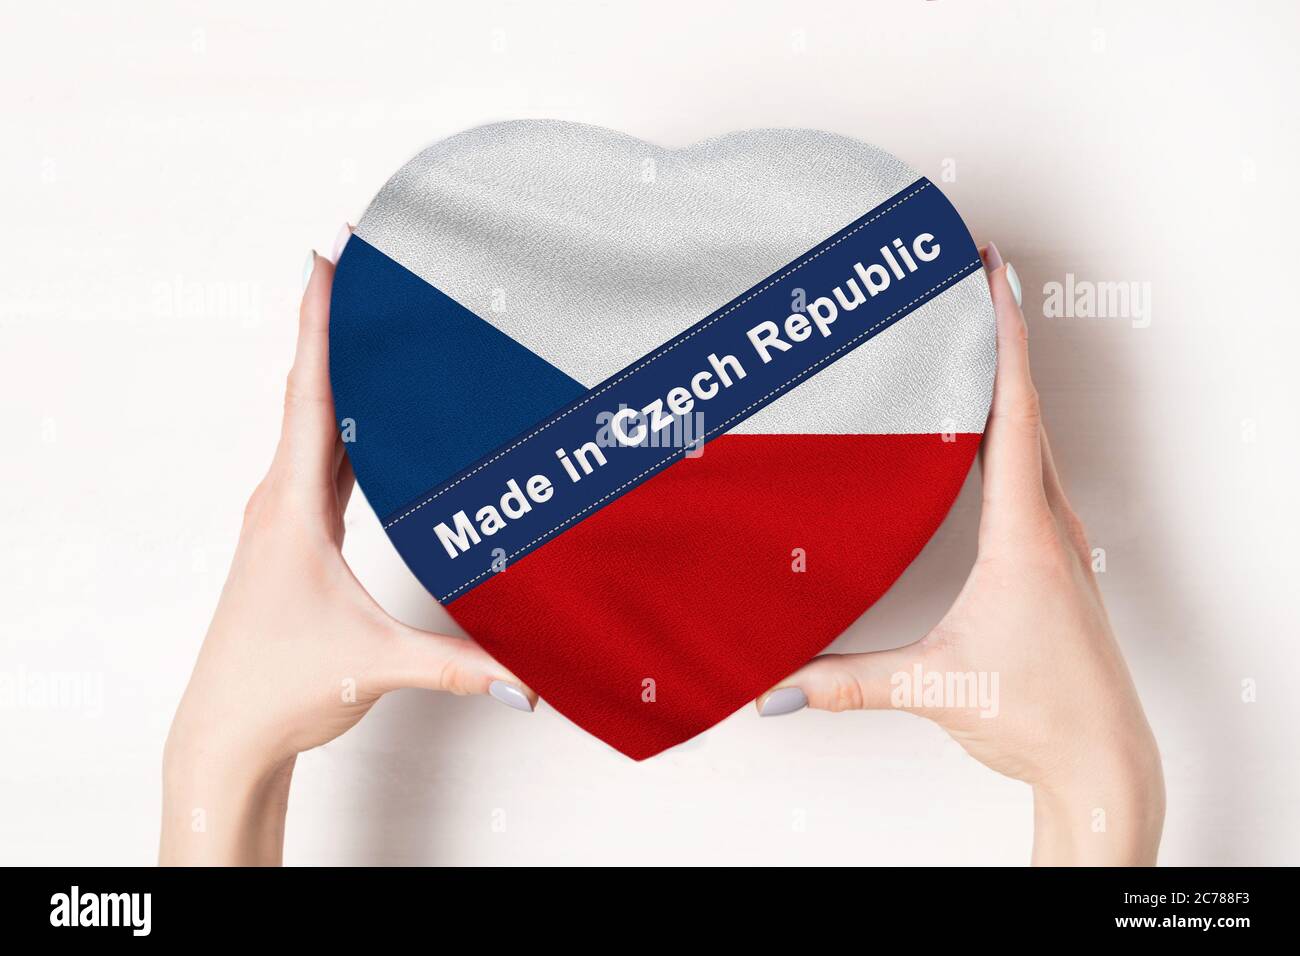 Inscription Made in Czech Republic, the flag of Czech Republic. Female hands holding a heart shaped box. White background. Stock Photo